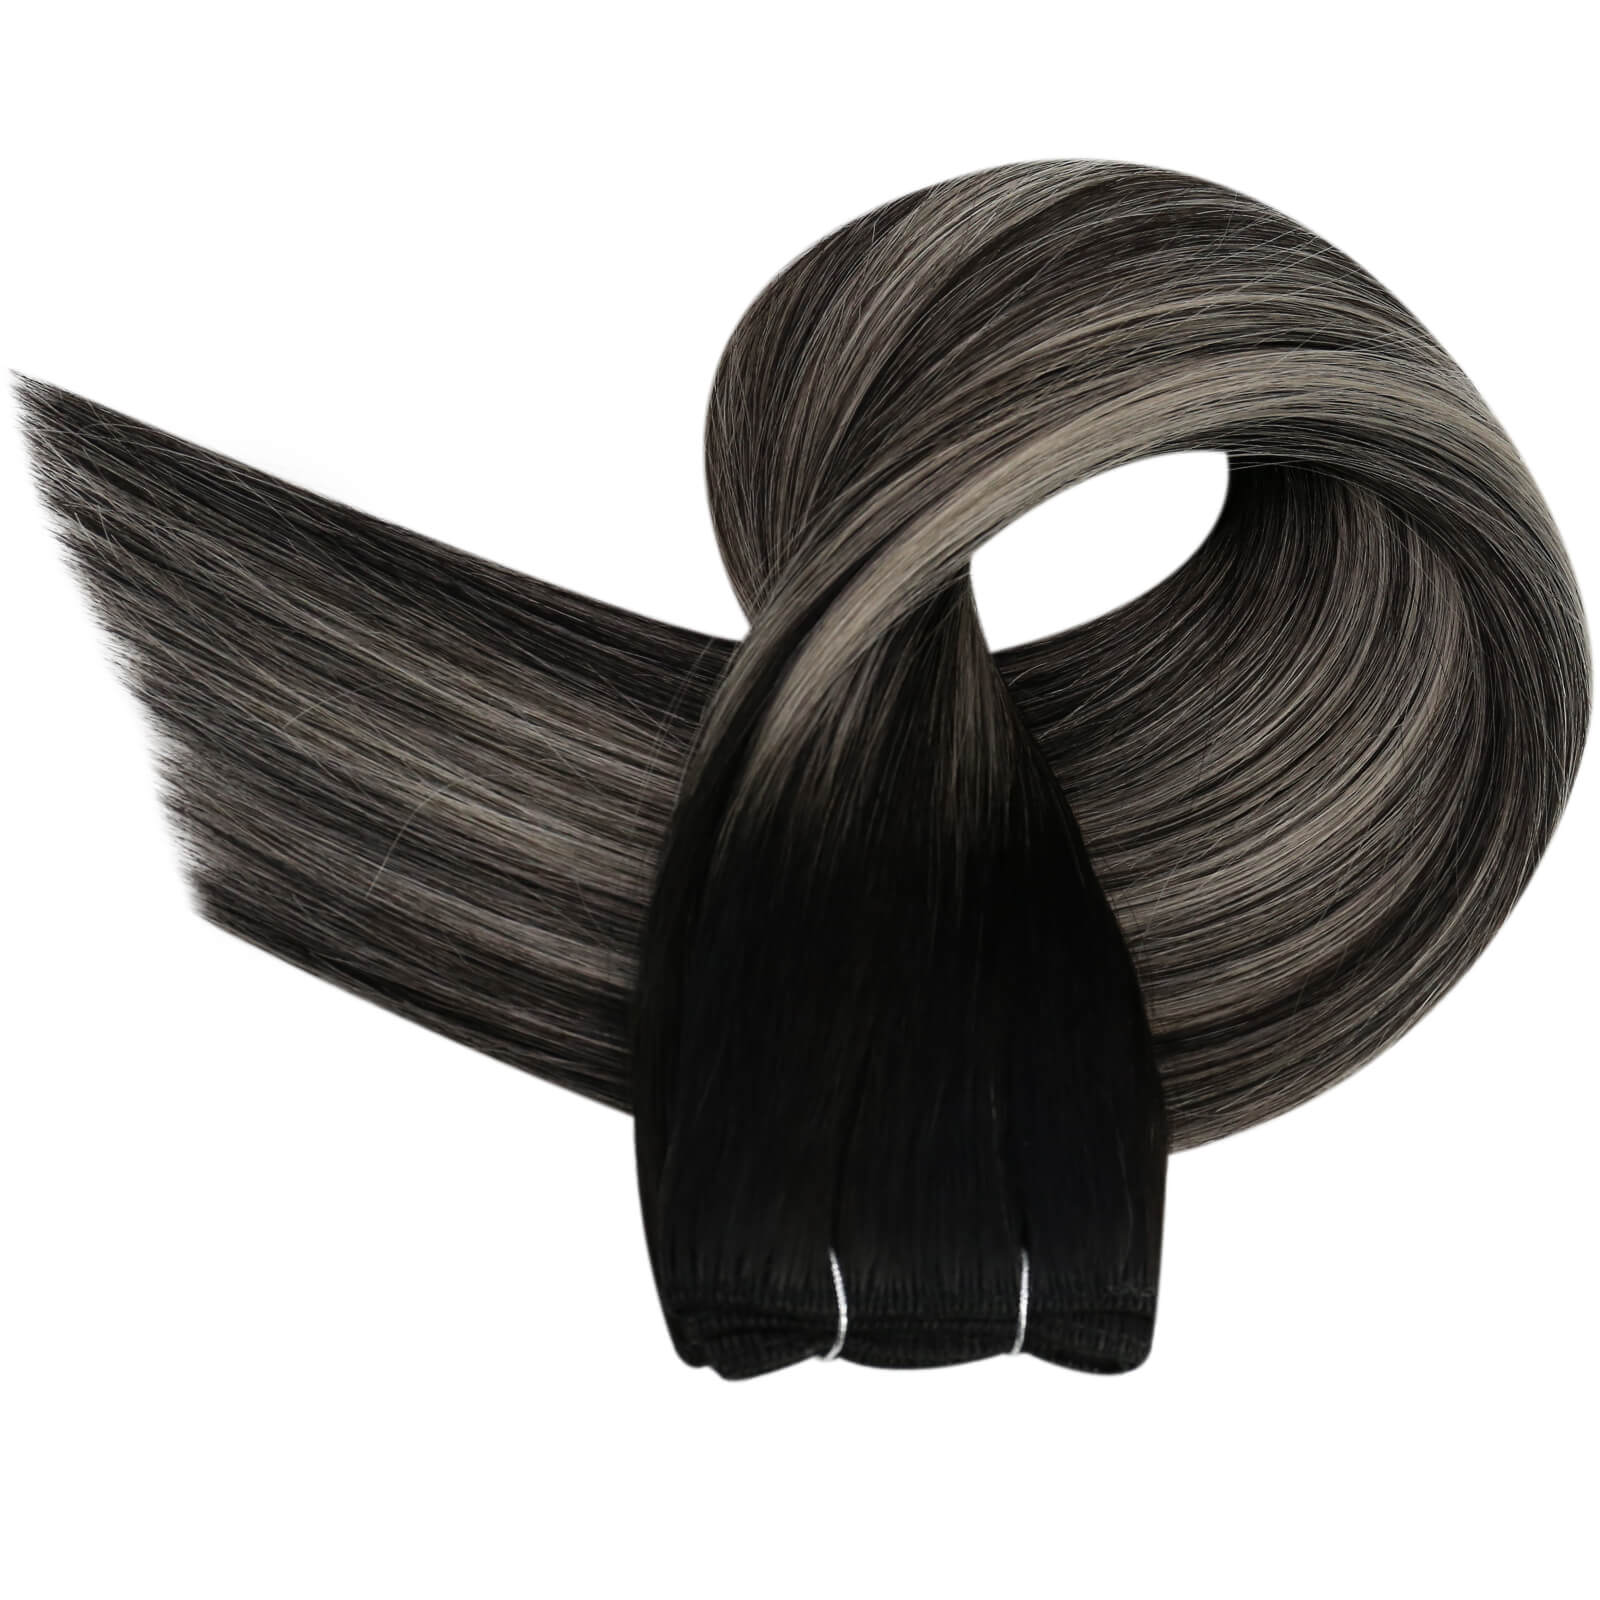 Virgin Machine Weft Hair Bundles Balayage Black With Silver #1B/Silver/1B |Youngsee